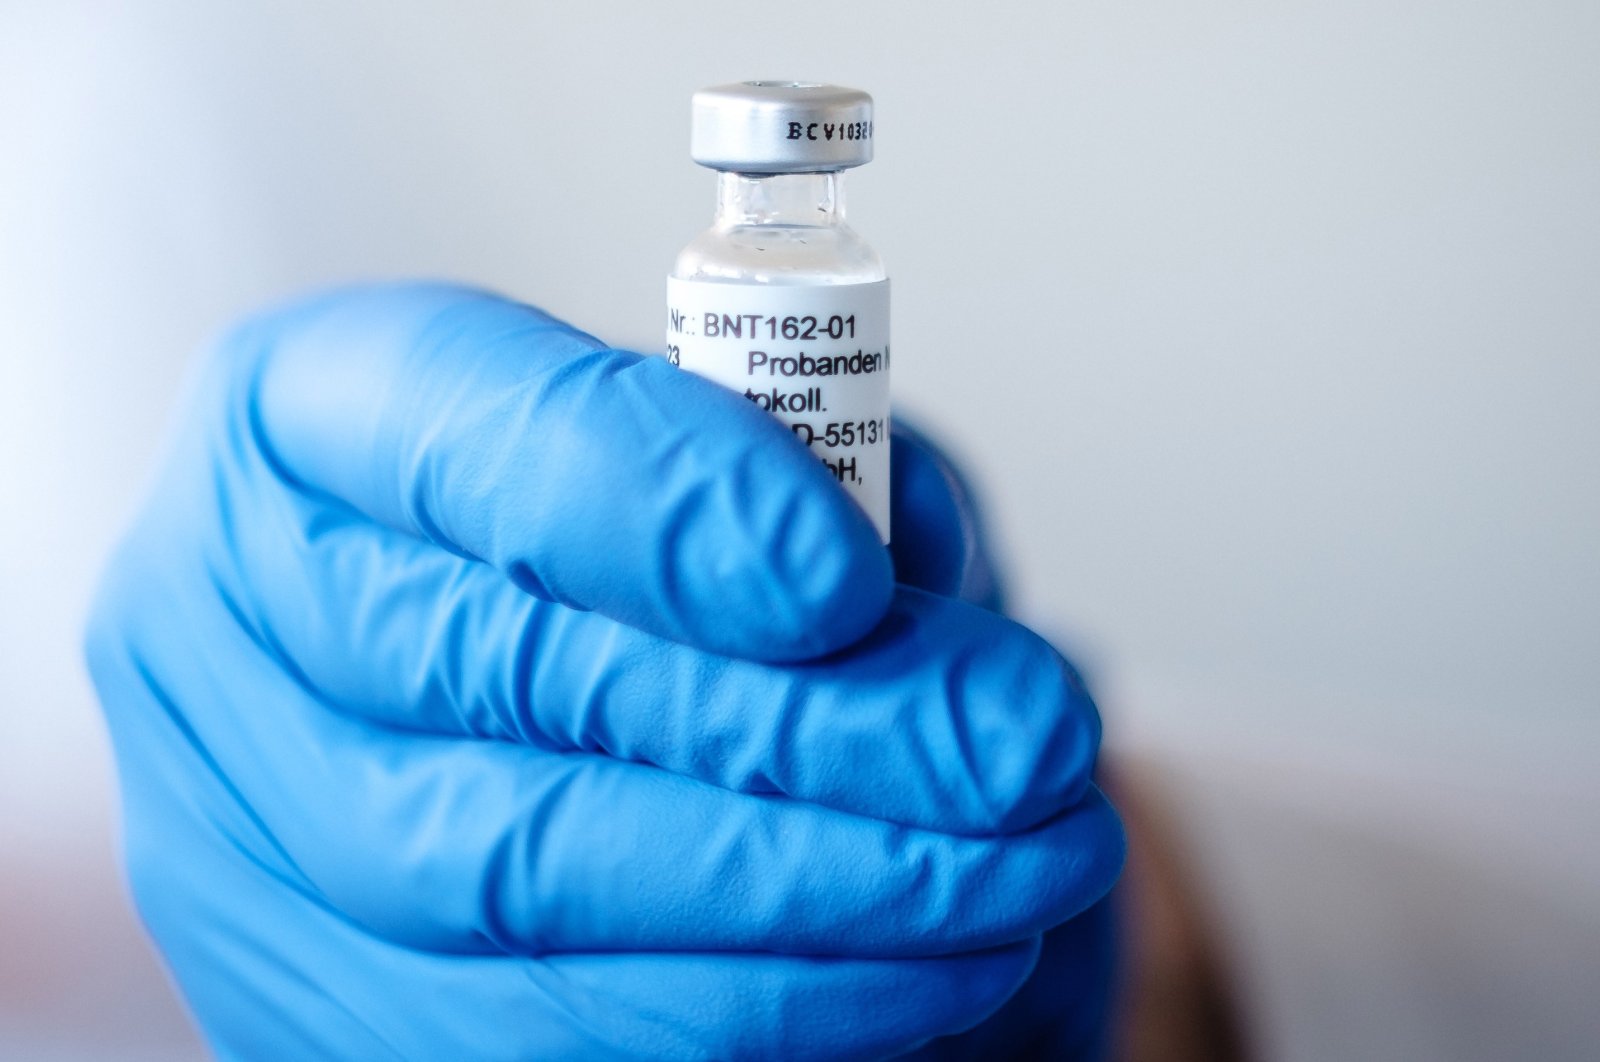 A hand holds an ampoule with BNT162b2, the mRNA-based vaccine candidate against COVID-19, in Mainz, Germany, in this undated photo. (BioNTech handout via EPA)